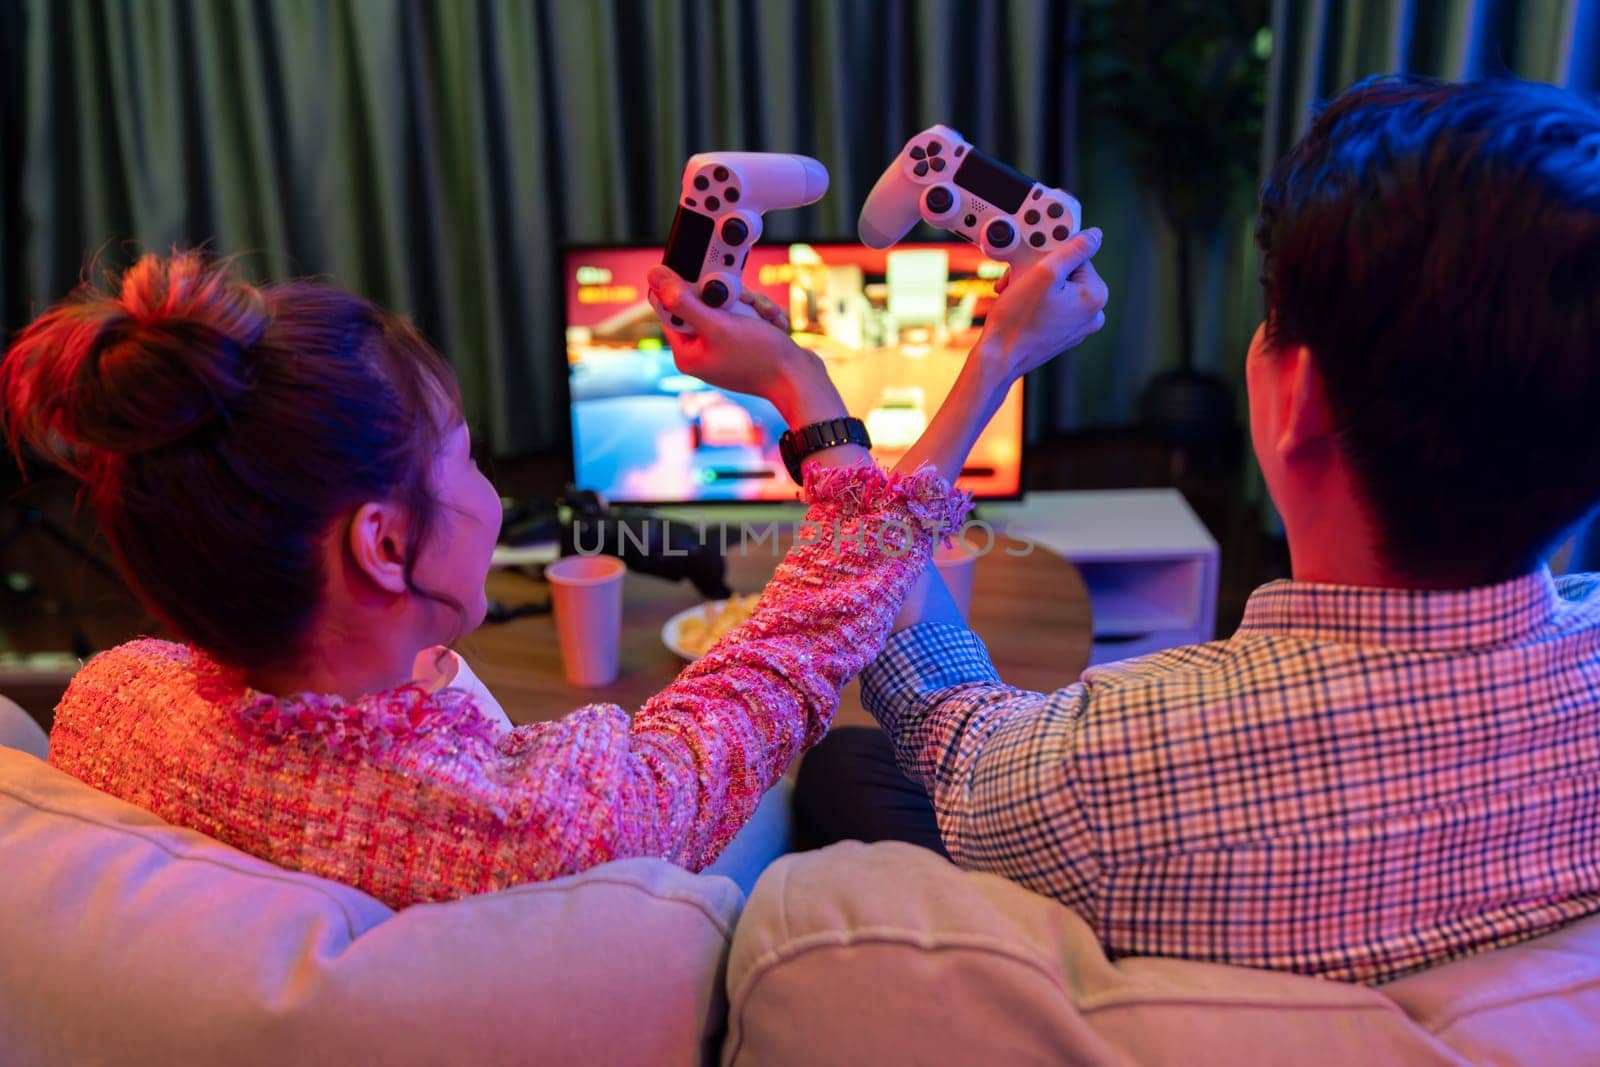 Couple hands cross joystick playing fighting competition game on tv. Infobahn. by biancoblue